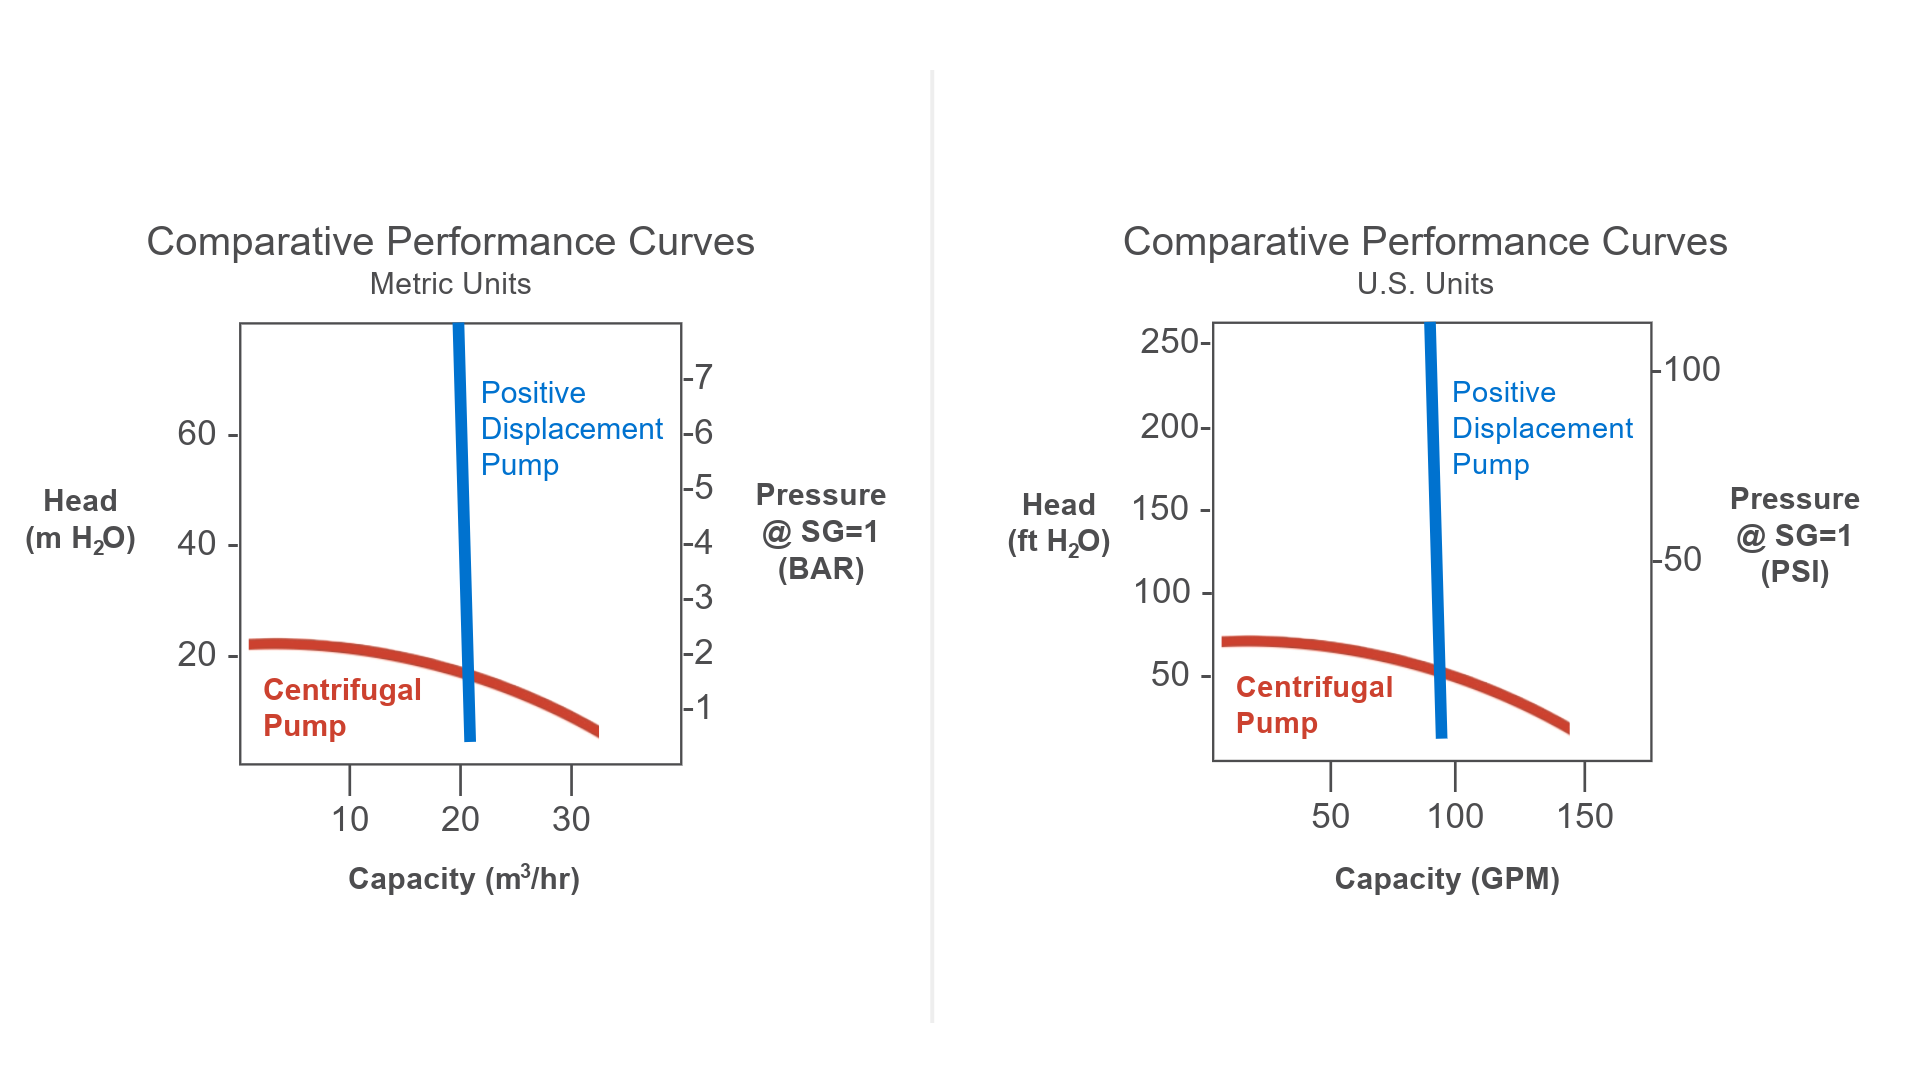 Performance curves comparing rotary positive displacement and centrifugal pumps